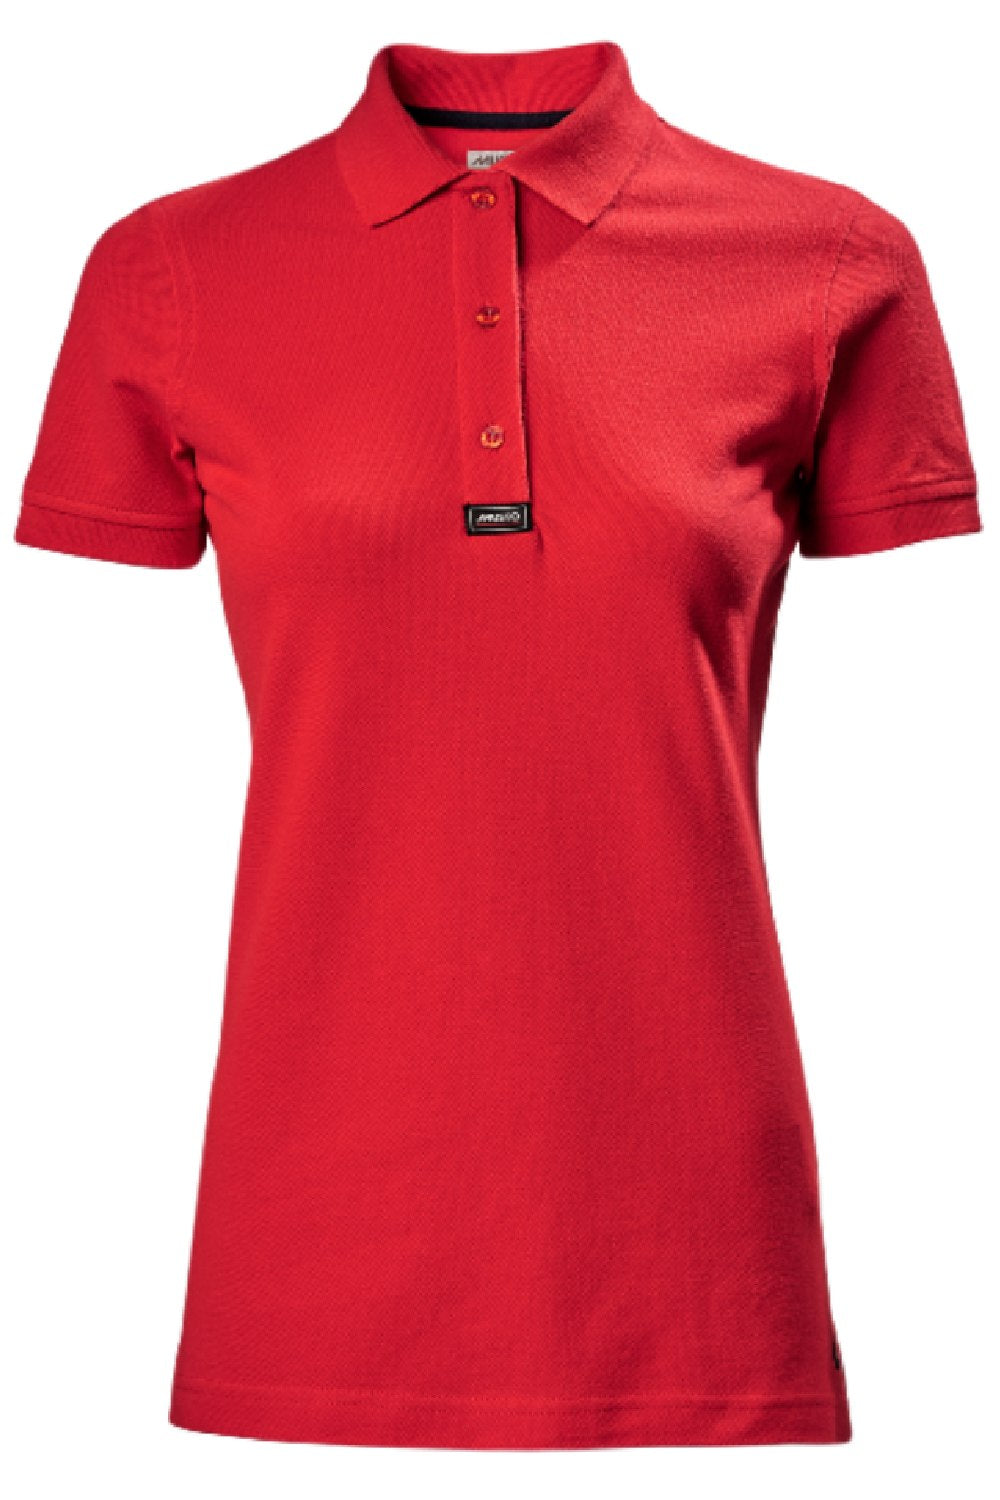 Musto Ladies Pique Polo in True Red